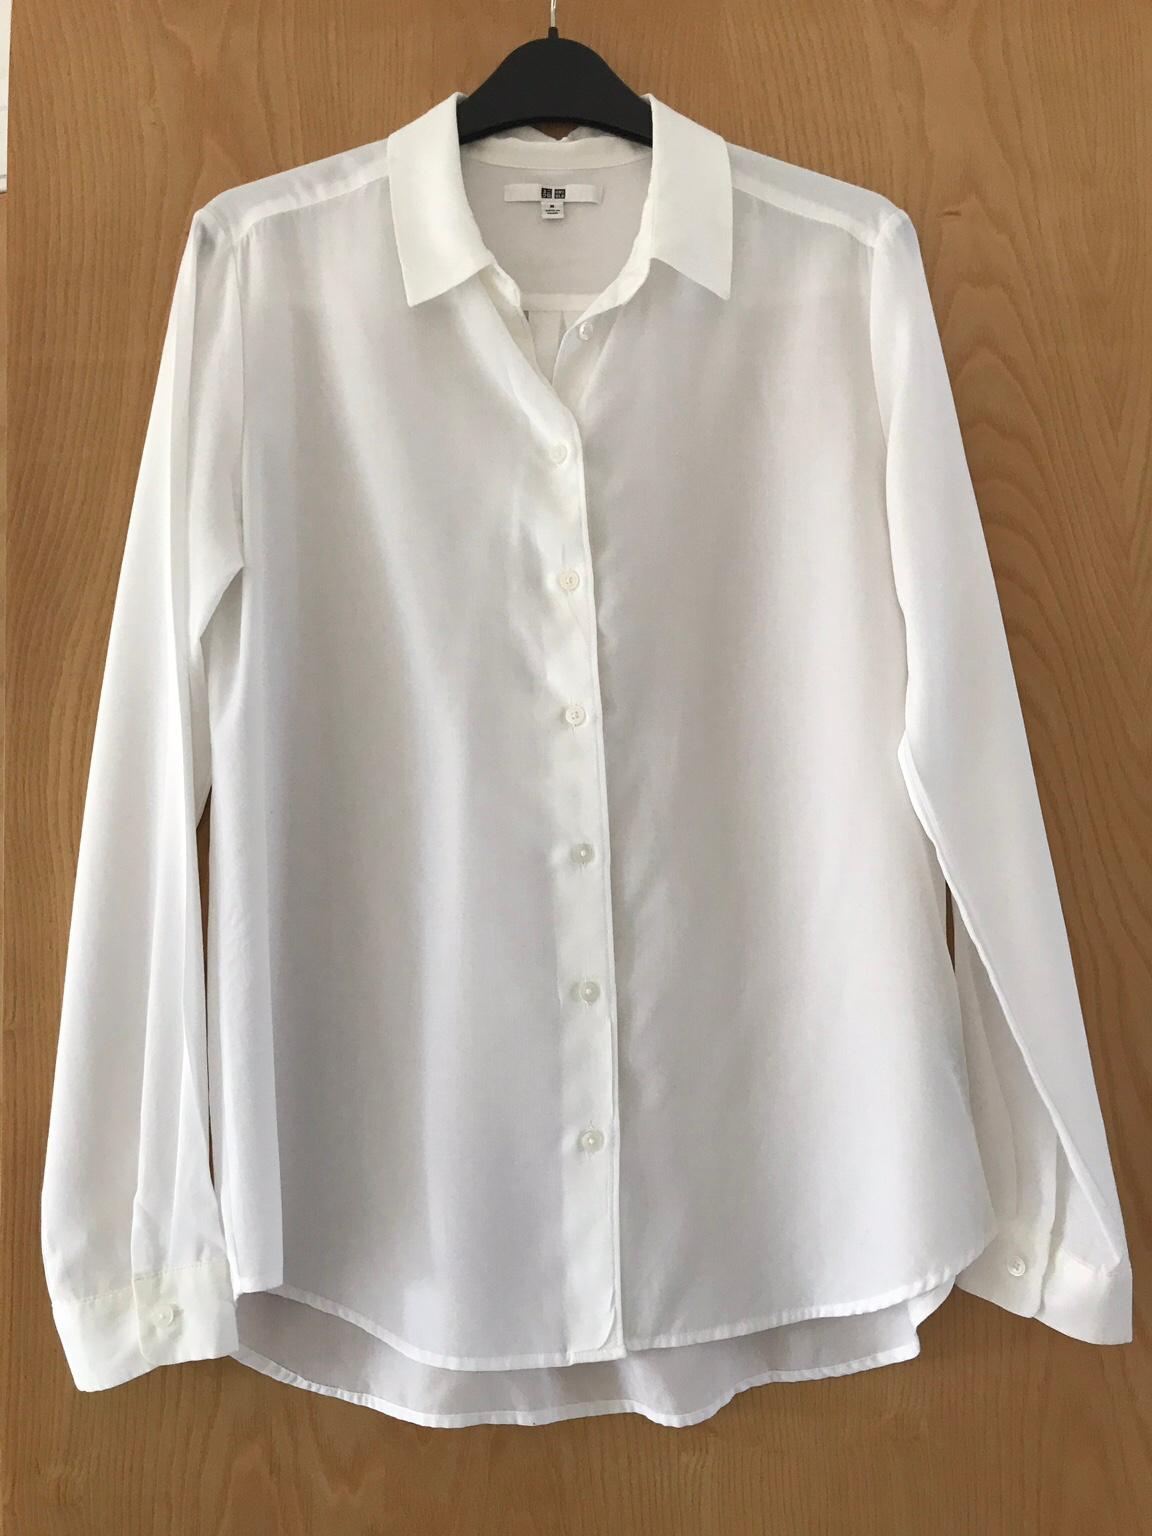 Ladies white blouse by UNIQLO M in ME16 Maidstone for £2.00 for sale ...